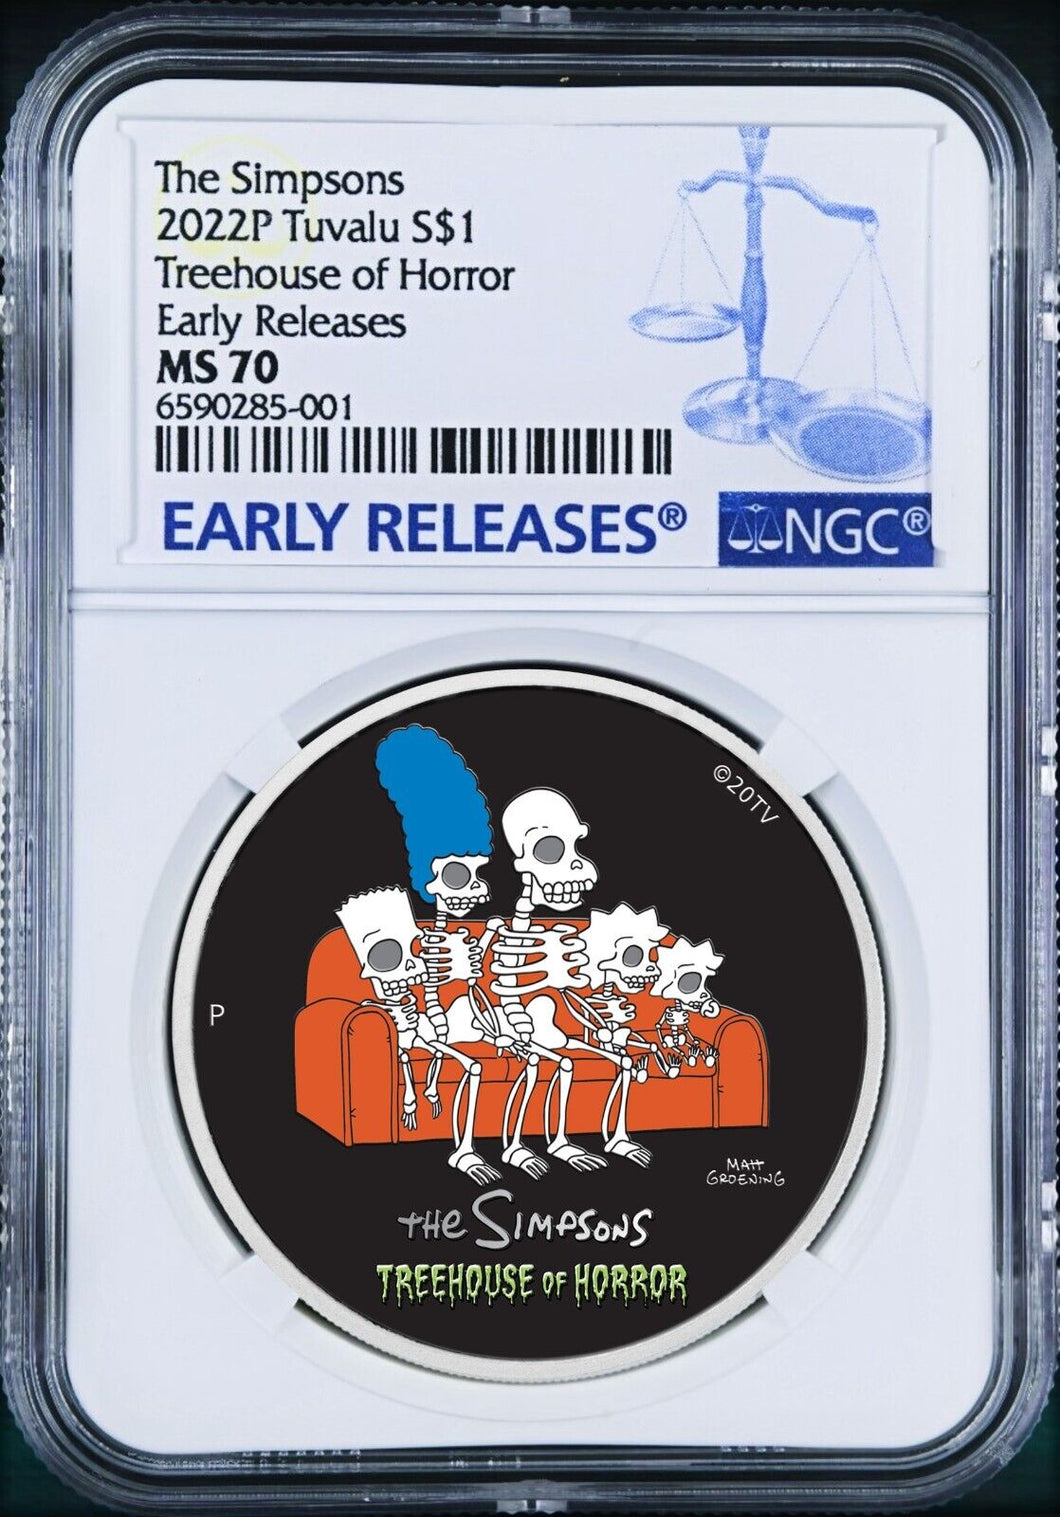 2022 The Simpsons Series TREEHOUSE OF HORROR $1 1oz Silver COIN NGC MS70 ER